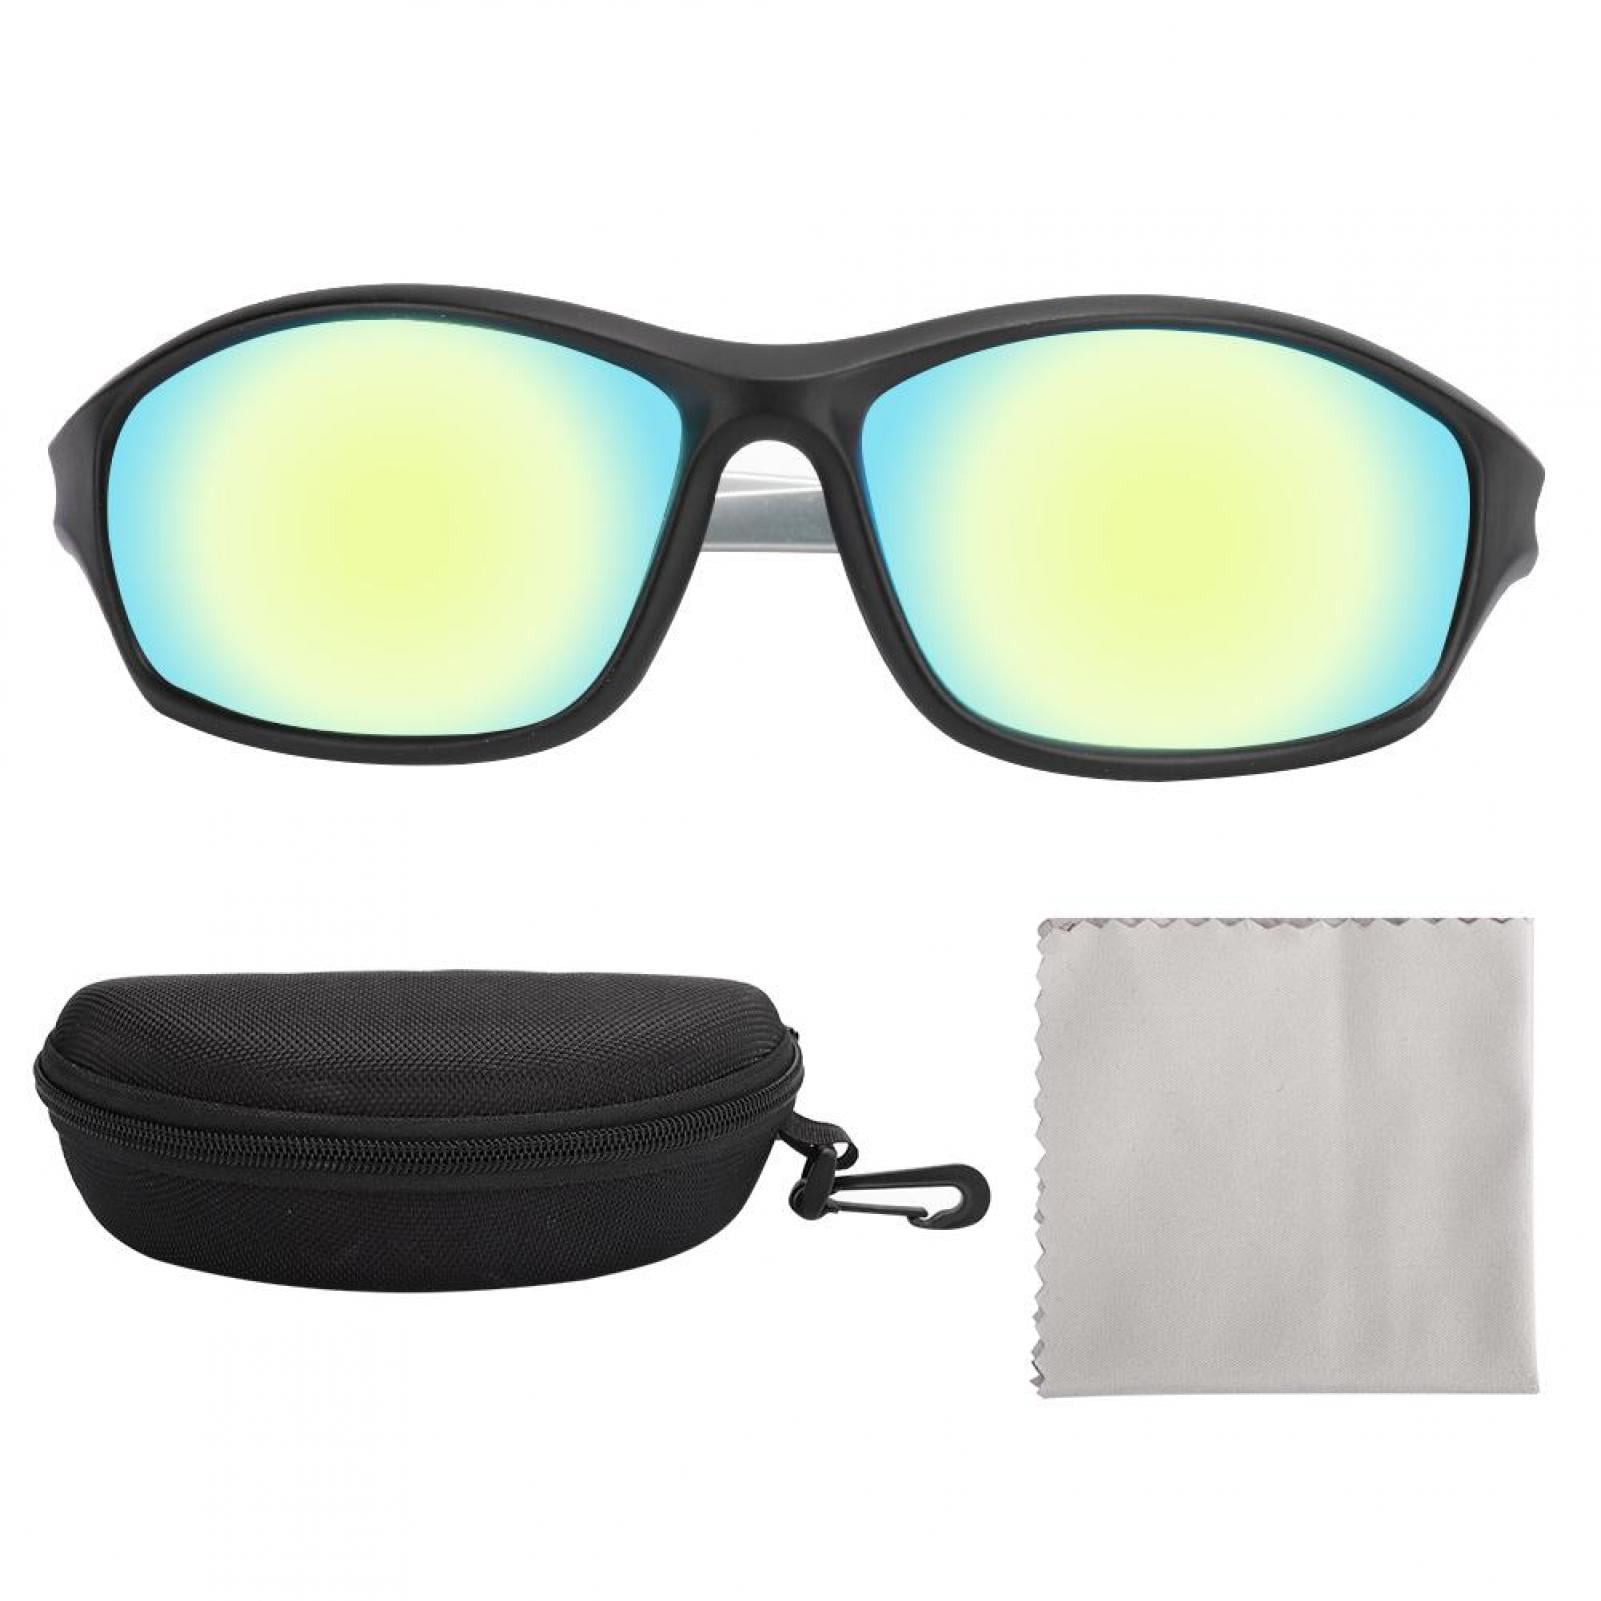 LED Eyes Safe Indoor Growing Hydroponics Grow Light Room Glasses for HPS MH 